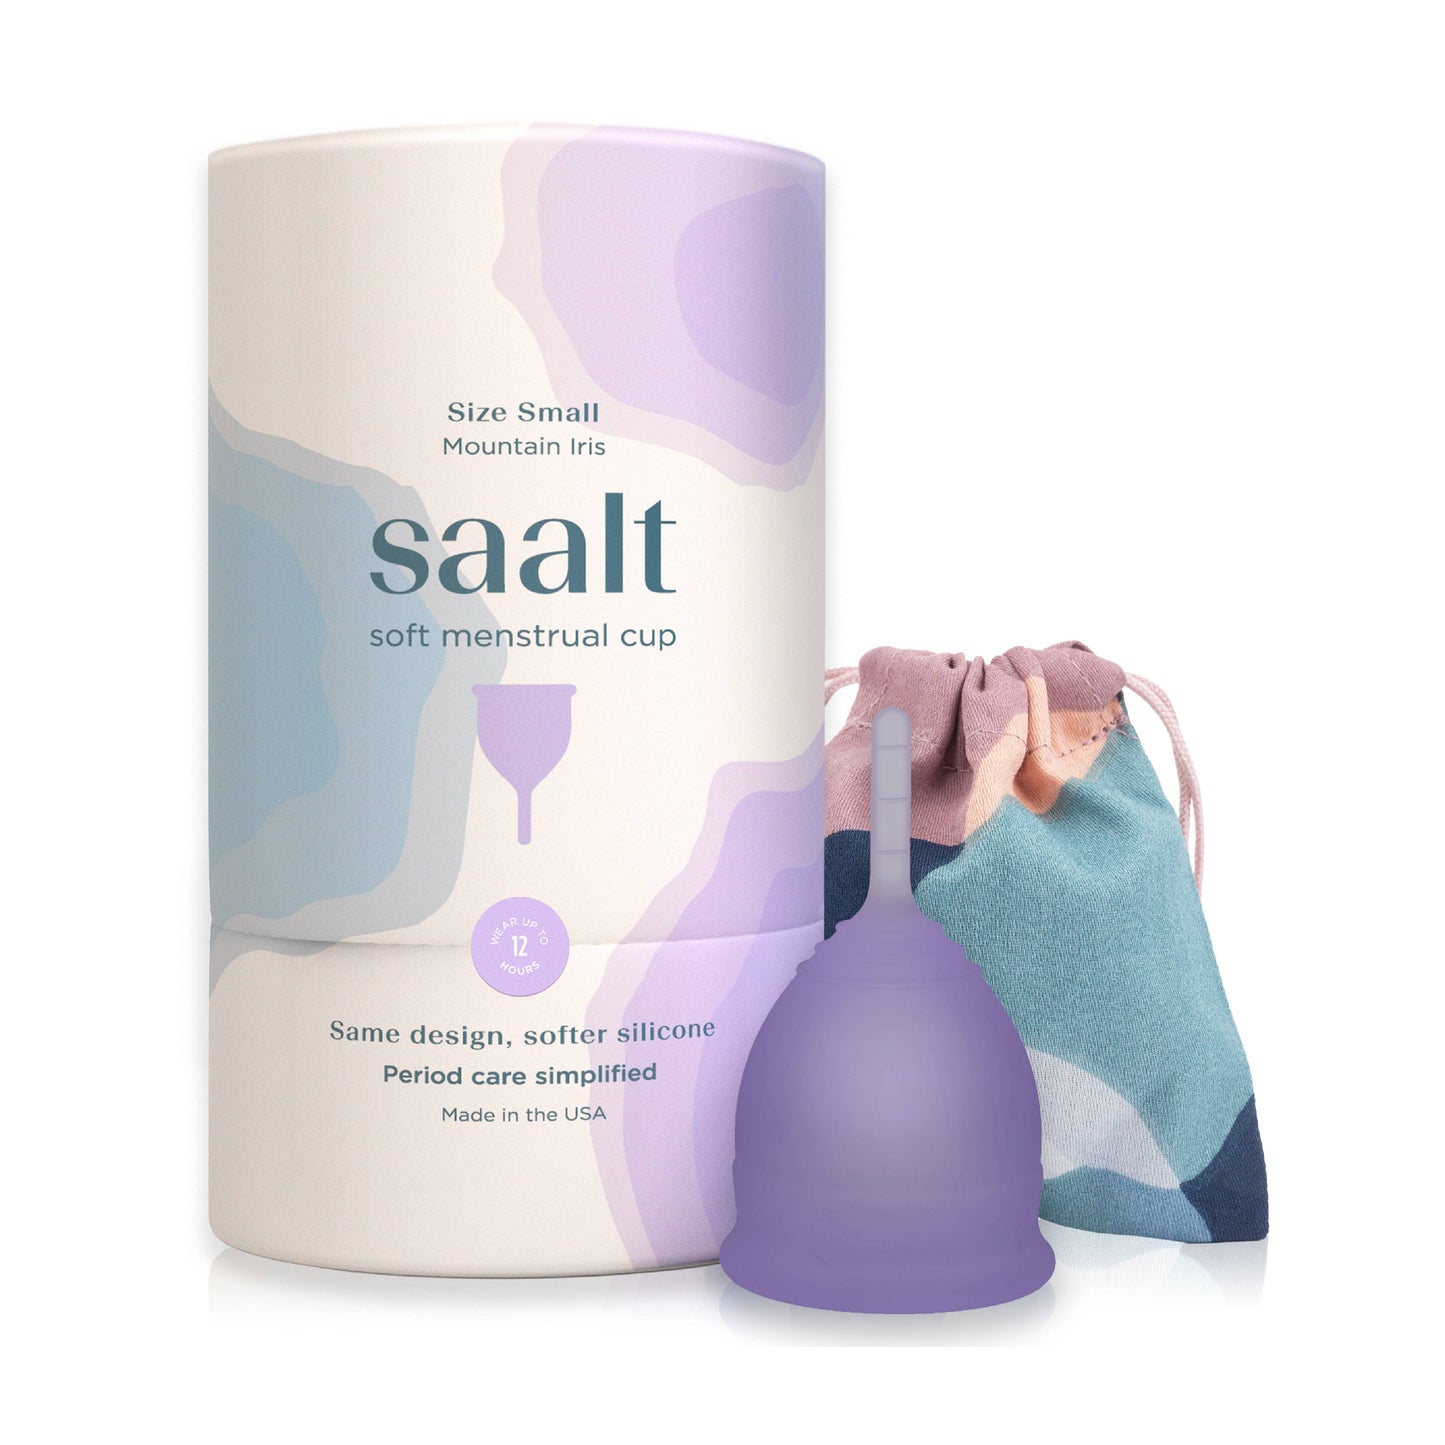 Saalt Soft Menstrual Cup - Size Small - Reusable Period Care